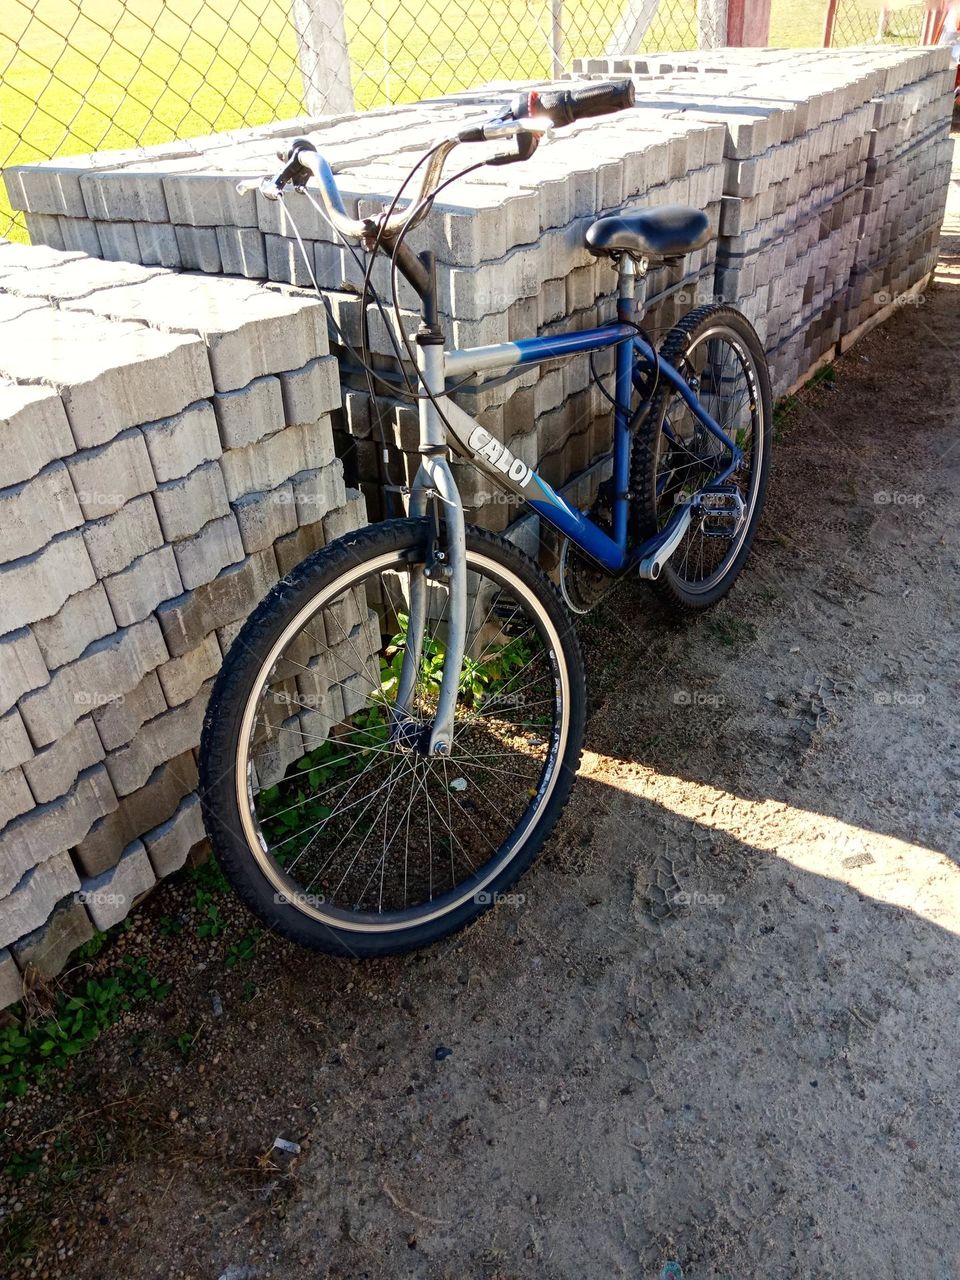 A bycicle by a pile of concrete blocks